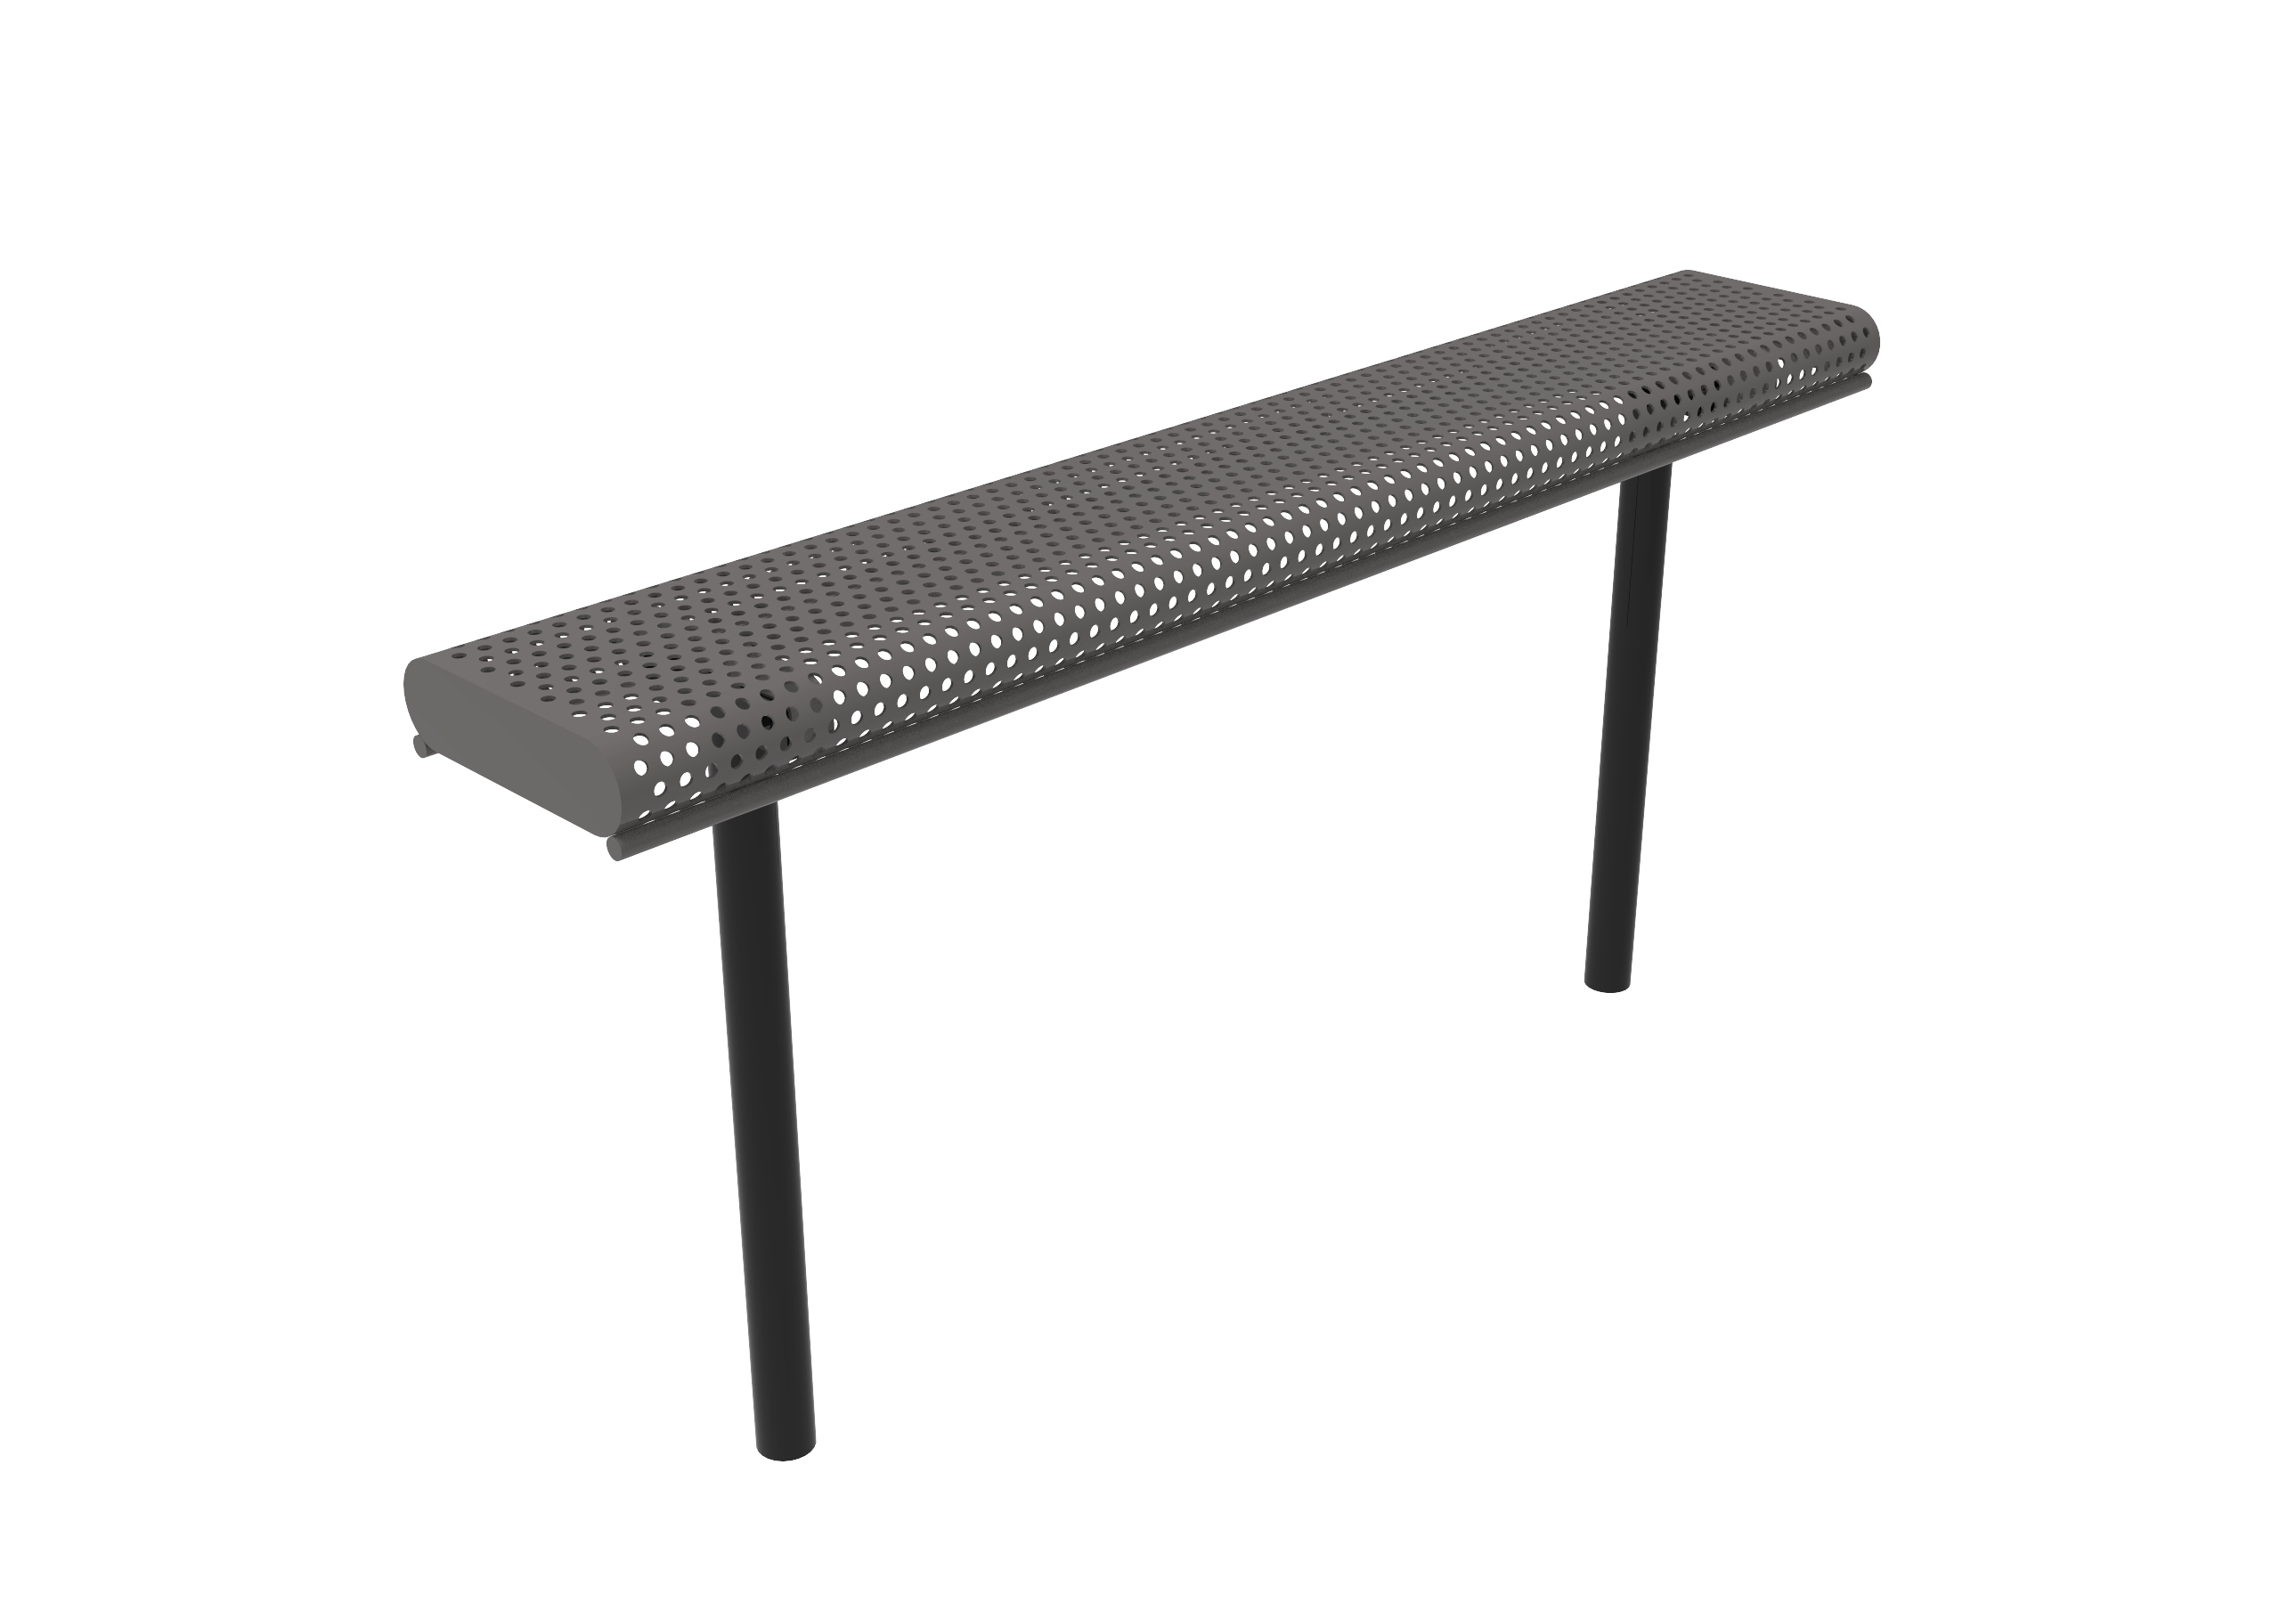 4′ Rolled Bench Without Back-Punched
BRE04-D-22-000
Industry Standard Finish
$519.00
BRE04-B-22-000
Advantage Premium Finish
$629.00
